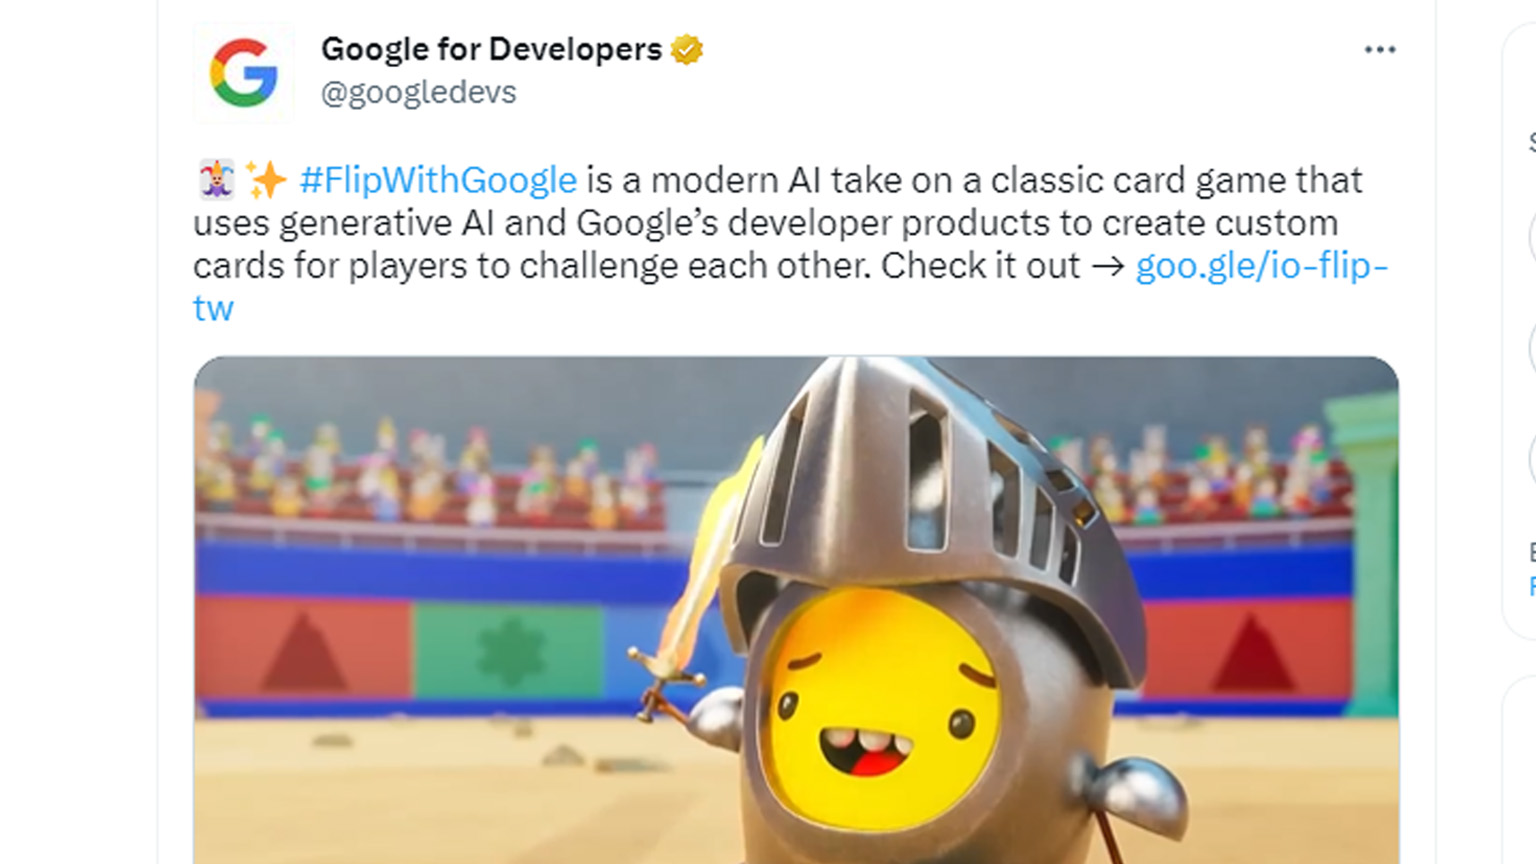 The Flip with Google game